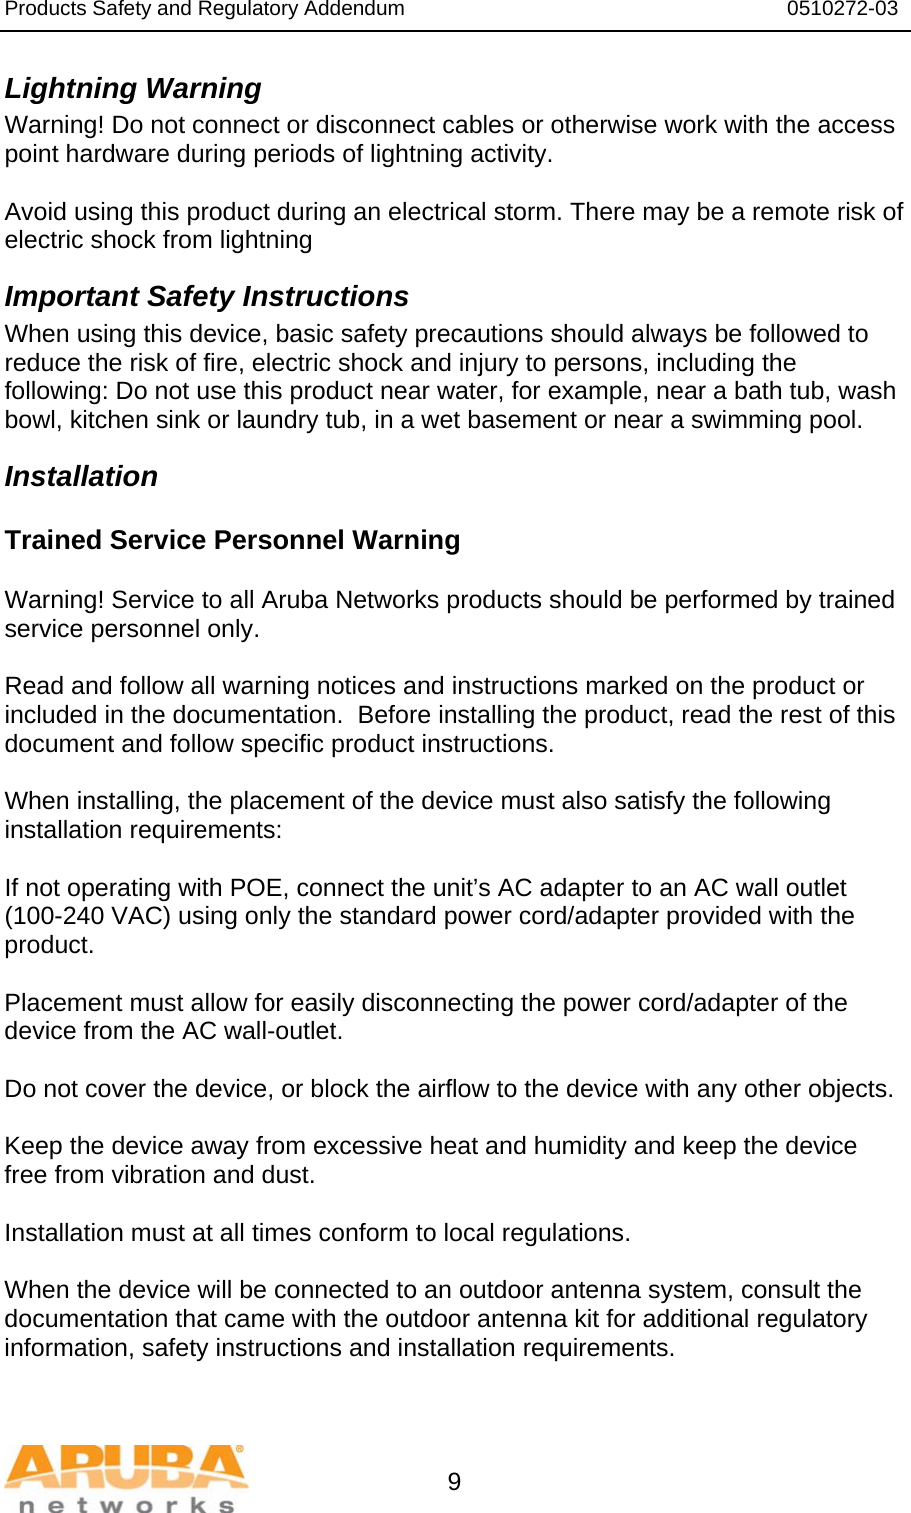 Products Safety and Regulatory Addendum                                                                  0510272-03   9 Lightning Warning Warning! Do not connect or disconnect cables or otherwise work with the access point hardware during periods of lightning activity.  Avoid using this product during an electrical storm. There may be a remote risk of electric shock from lightning Important Safety Instructions When using this device, basic safety precautions should always be followed to reduce the risk of fire, electric shock and injury to persons, including the following: Do not use this product near water, for example, near a bath tub, wash bowl, kitchen sink or laundry tub, in a wet basement or near a swimming pool. Installation Trained Service Personnel Warning  Warning! Service to all Aruba Networks products should be performed by trained service personnel only.  Read and follow all warning notices and instructions marked on the product or included in the documentation.  Before installing the product, read the rest of this document and follow specific product instructions.  When installing, the placement of the device must also satisfy the following installation requirements:  If not operating with POE, connect the unit’s AC adapter to an AC wall outlet (100-240 VAC) using only the standard power cord/adapter provided with the product.  Placement must allow for easily disconnecting the power cord/adapter of the device from the AC wall-outlet.  Do not cover the device, or block the airflow to the device with any other objects.   Keep the device away from excessive heat and humidity and keep the device free from vibration and dust.  Installation must at all times conform to local regulations.  When the device will be connected to an outdoor antenna system, consult the documentation that came with the outdoor antenna kit for additional regulatory information, safety instructions and installation requirements.  